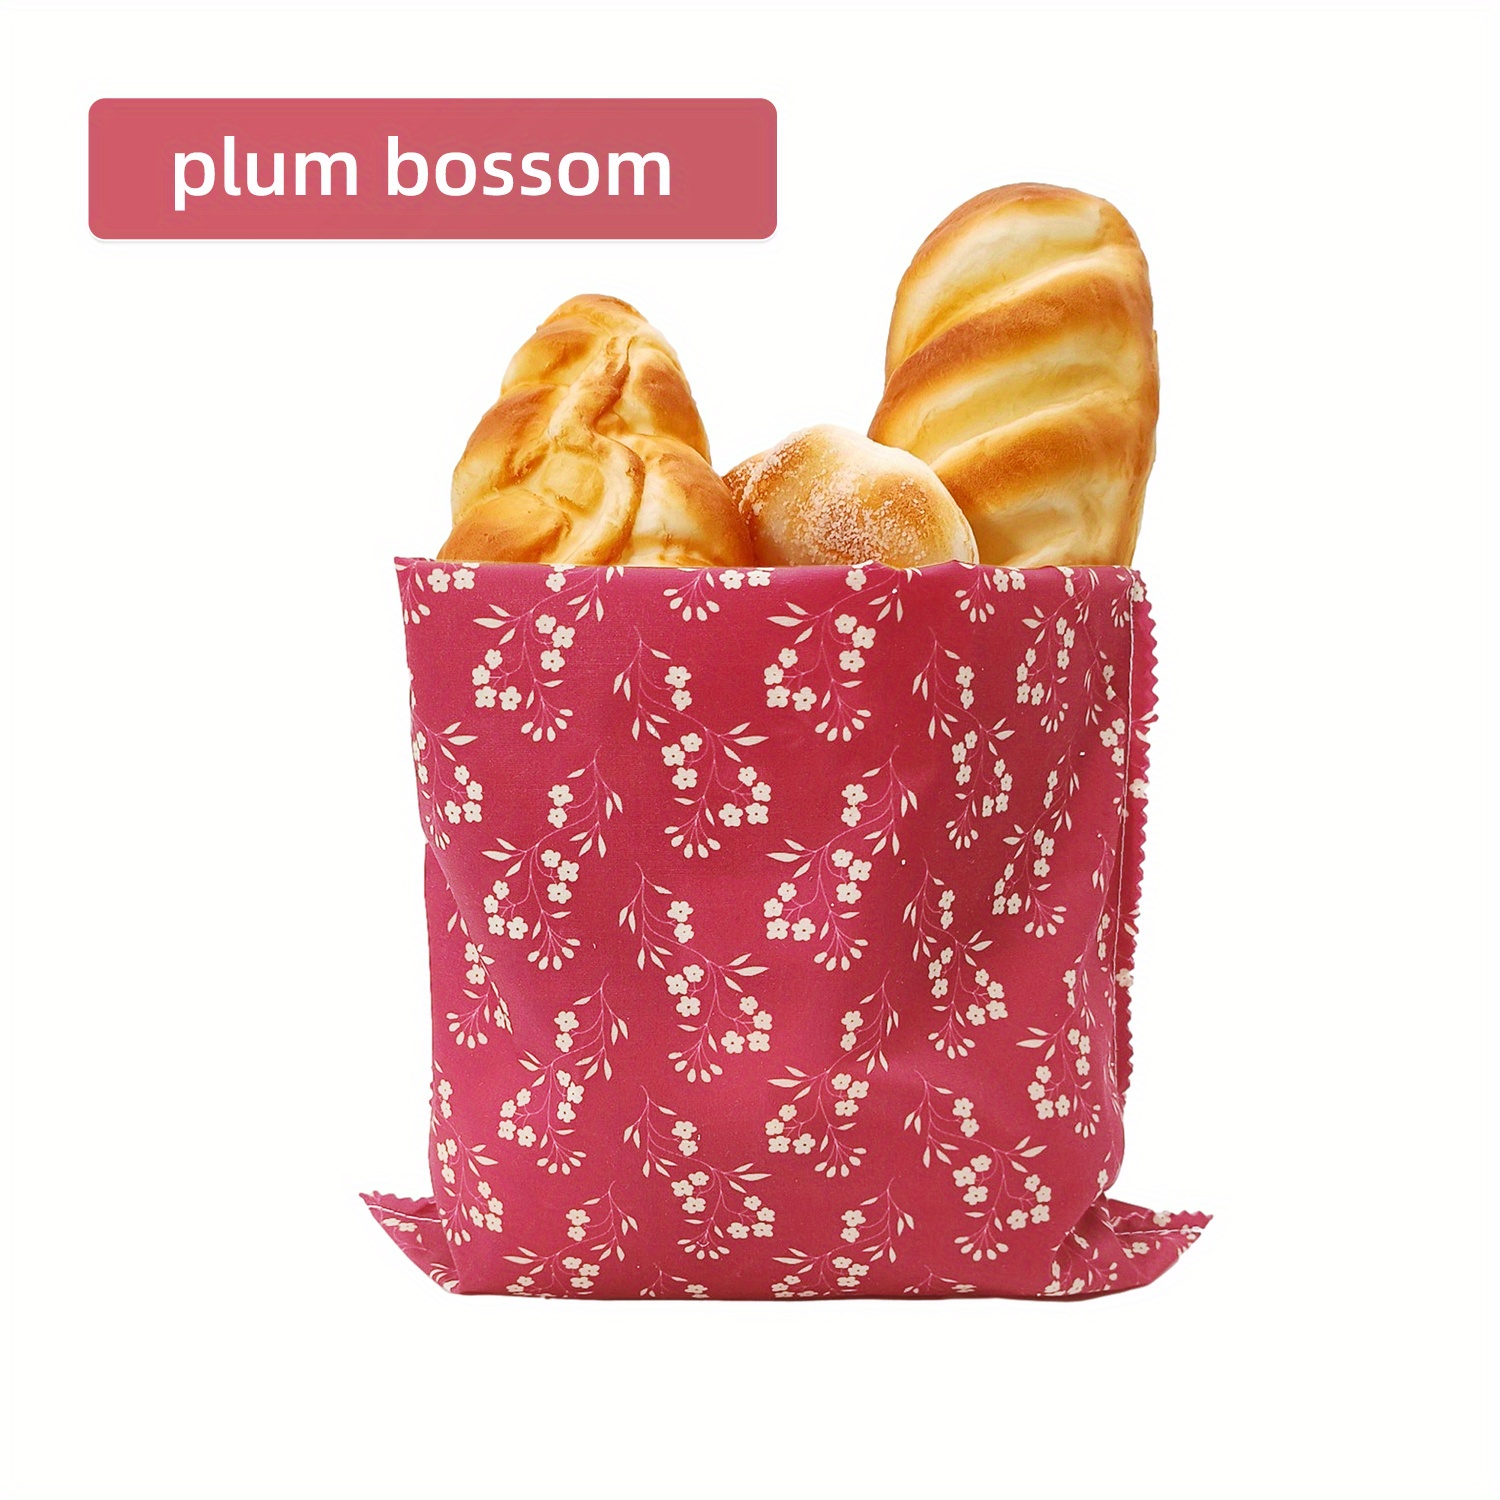 Sustainable Beeswax Bag/paper Reusable Beeswax Wrap For Food - Temu Austria